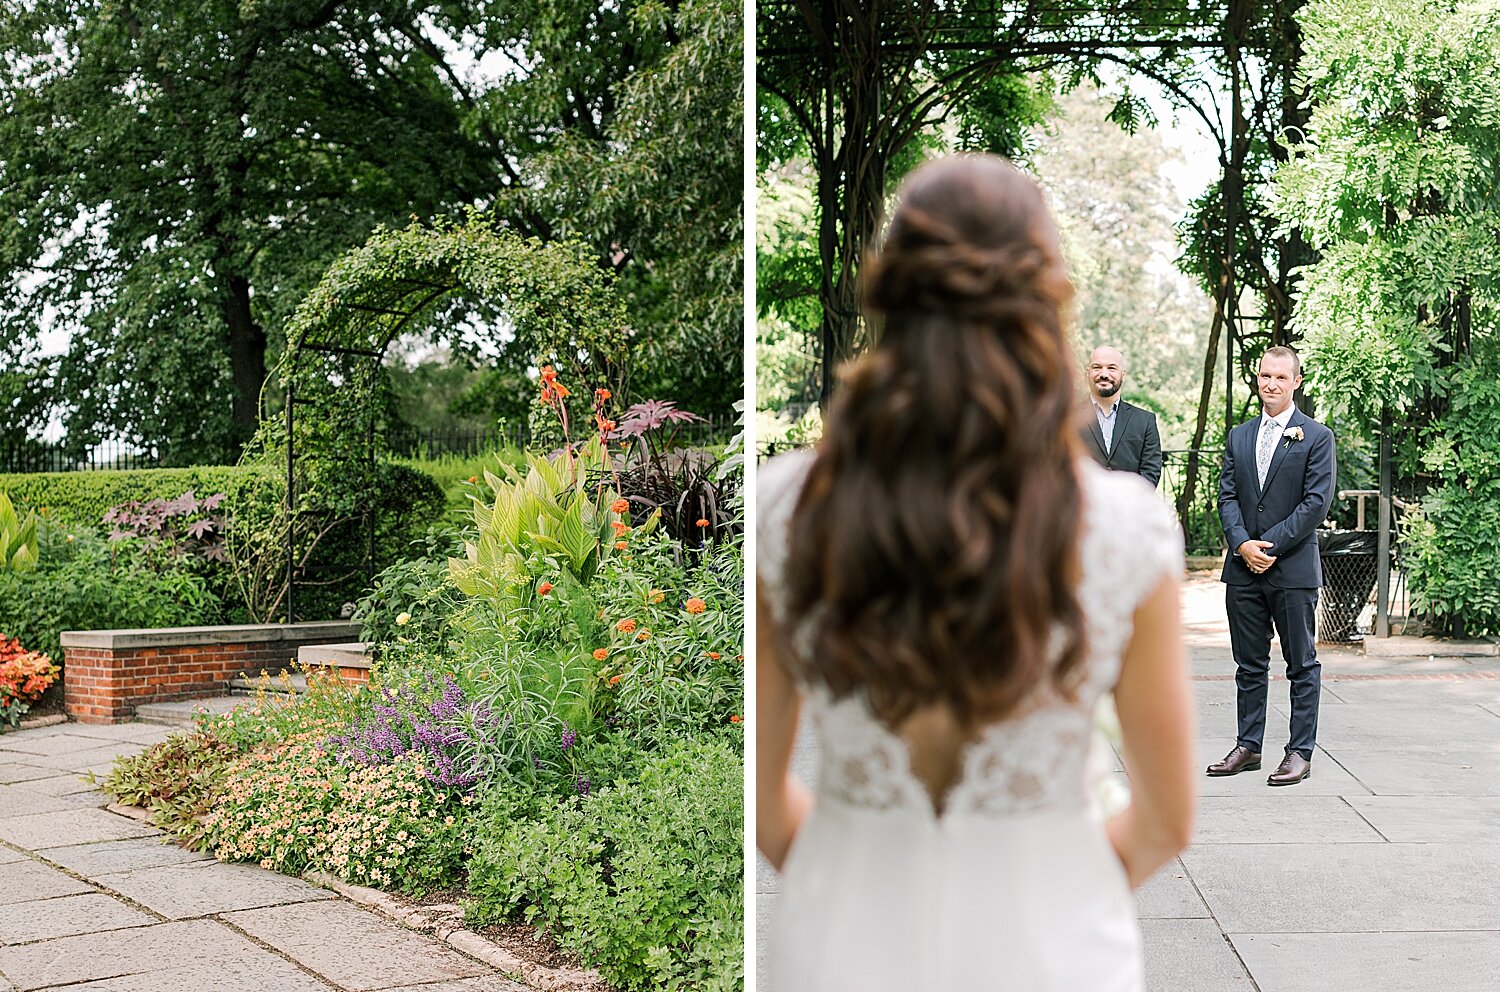 bride approaches groom for wedding ceremony | Asher Gardner Photography | Elopement at the Central Park Conservatory Gardens